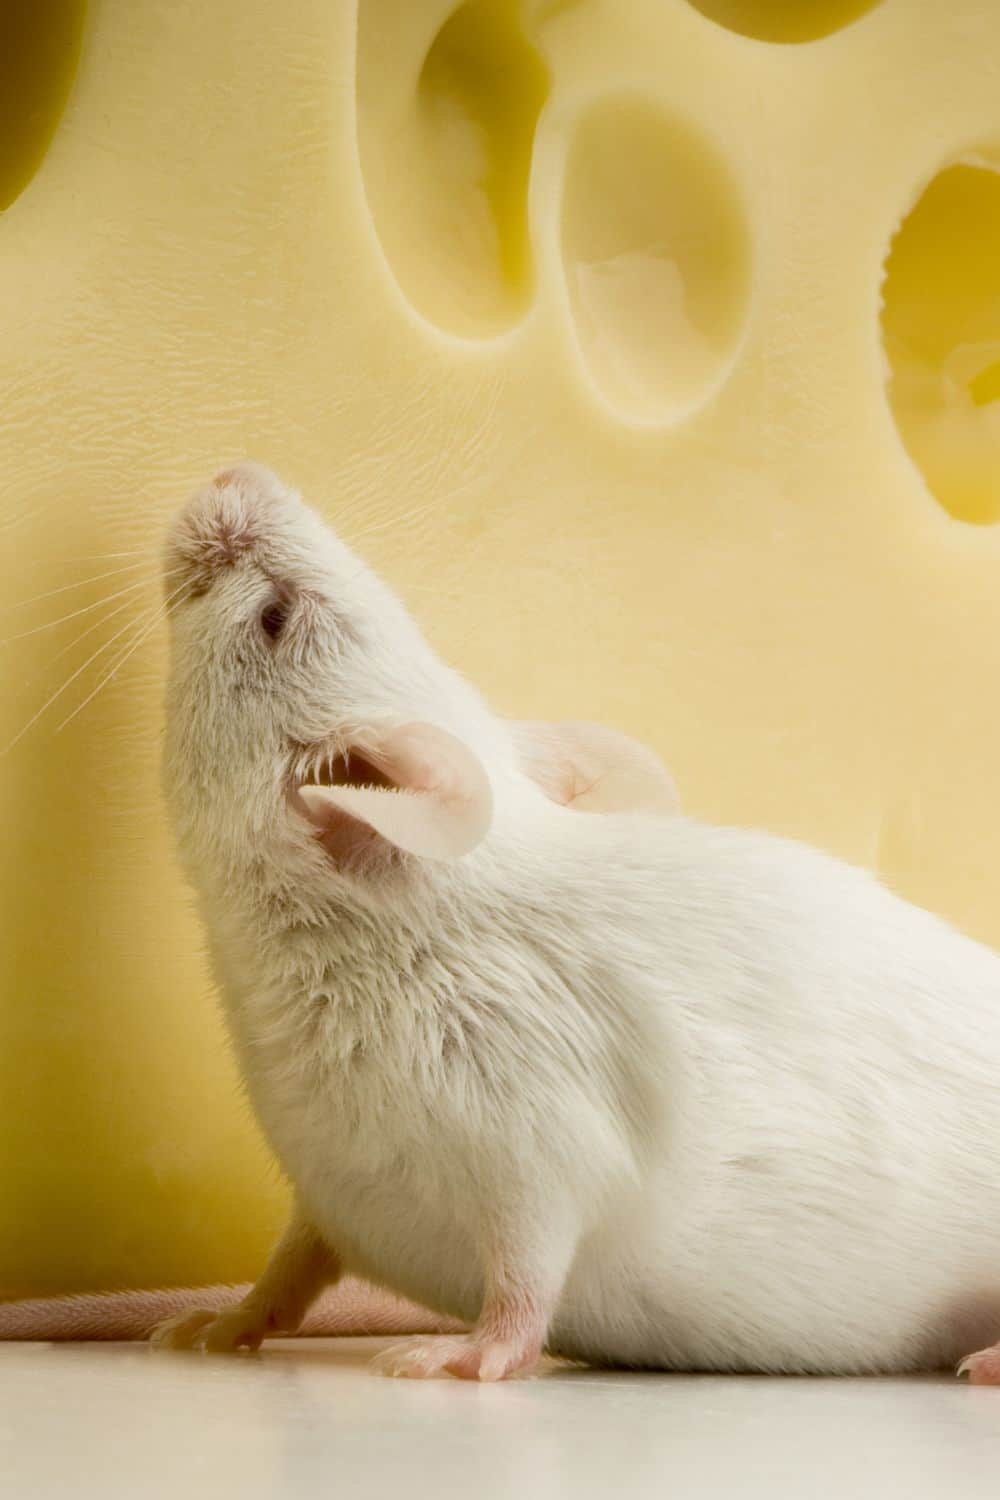 Interpreting a dream of a white mouse